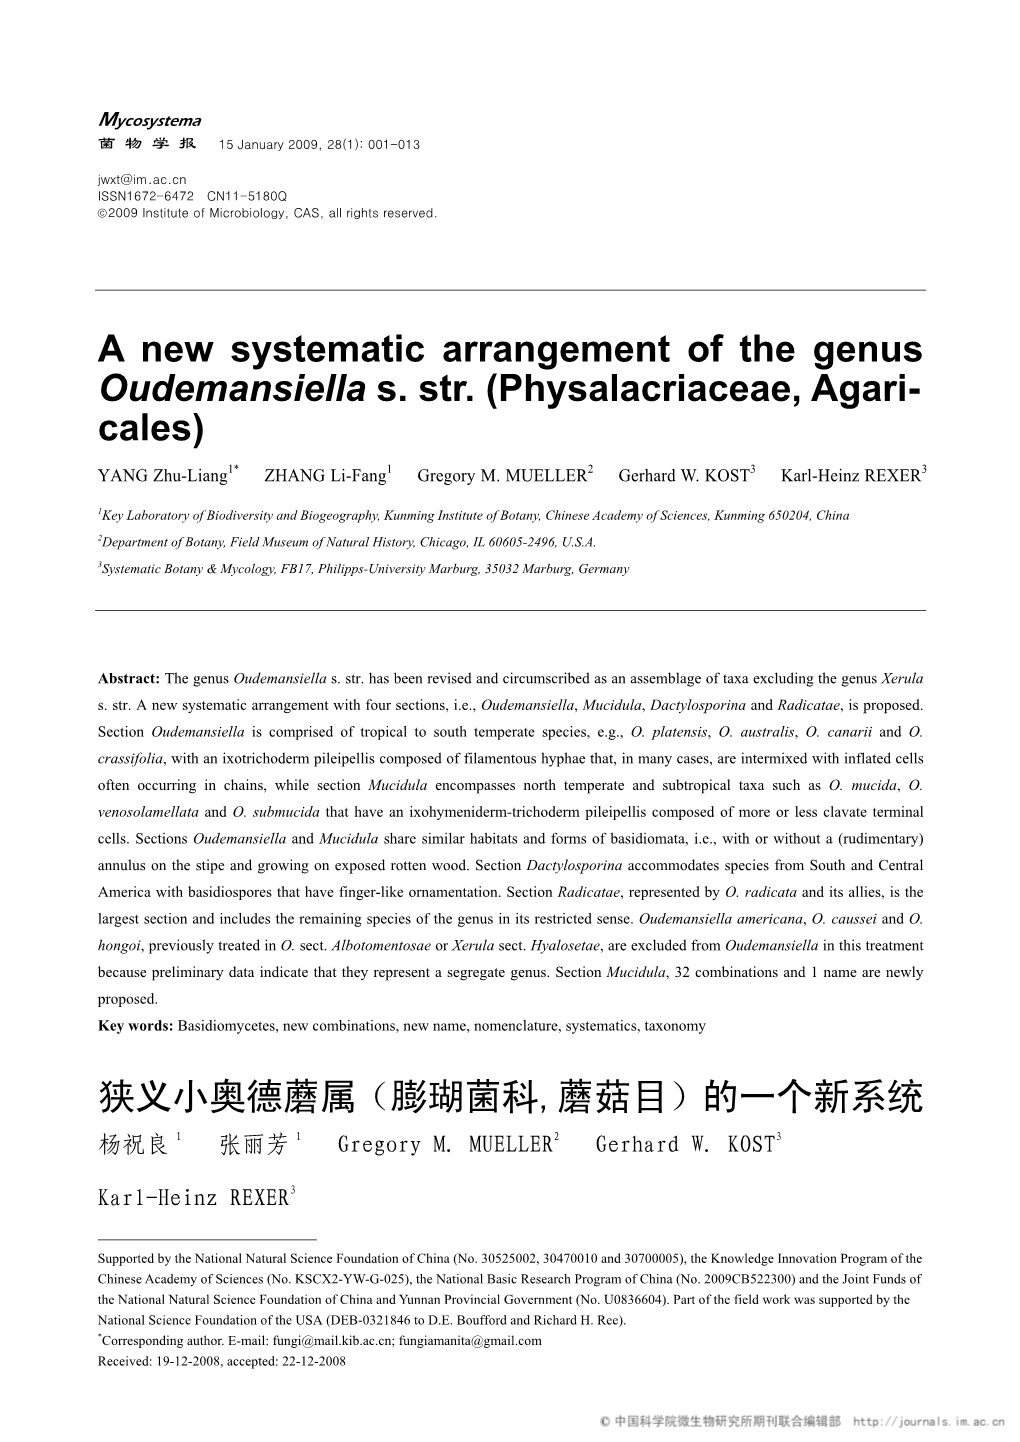 A New Systematic Arrangement of the Genus Oudemansiella S